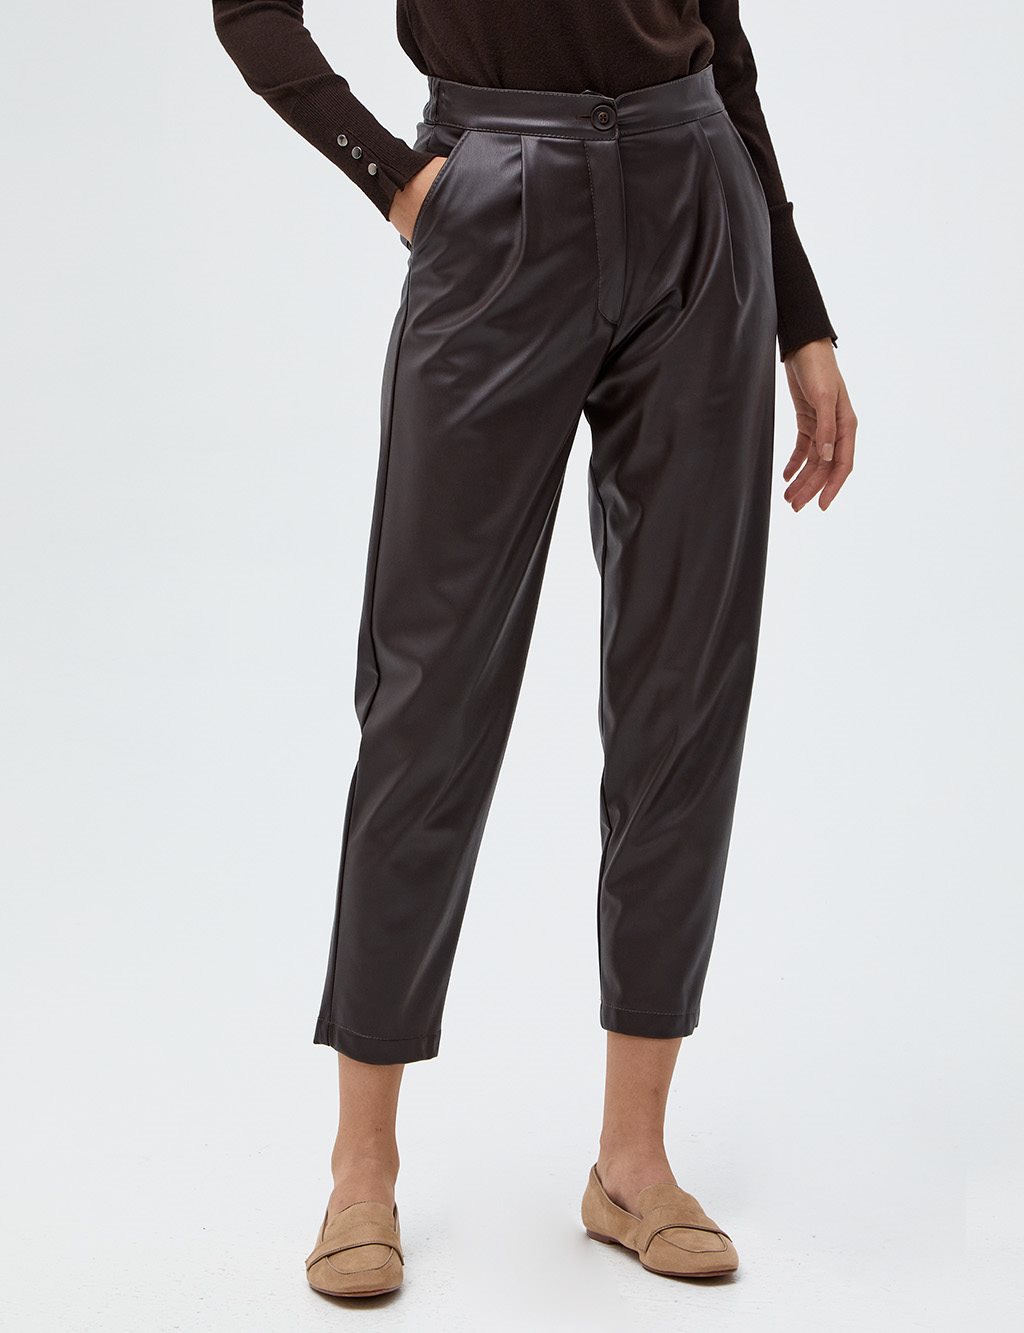 Pleated Faux Leather Pants Bitter Brown